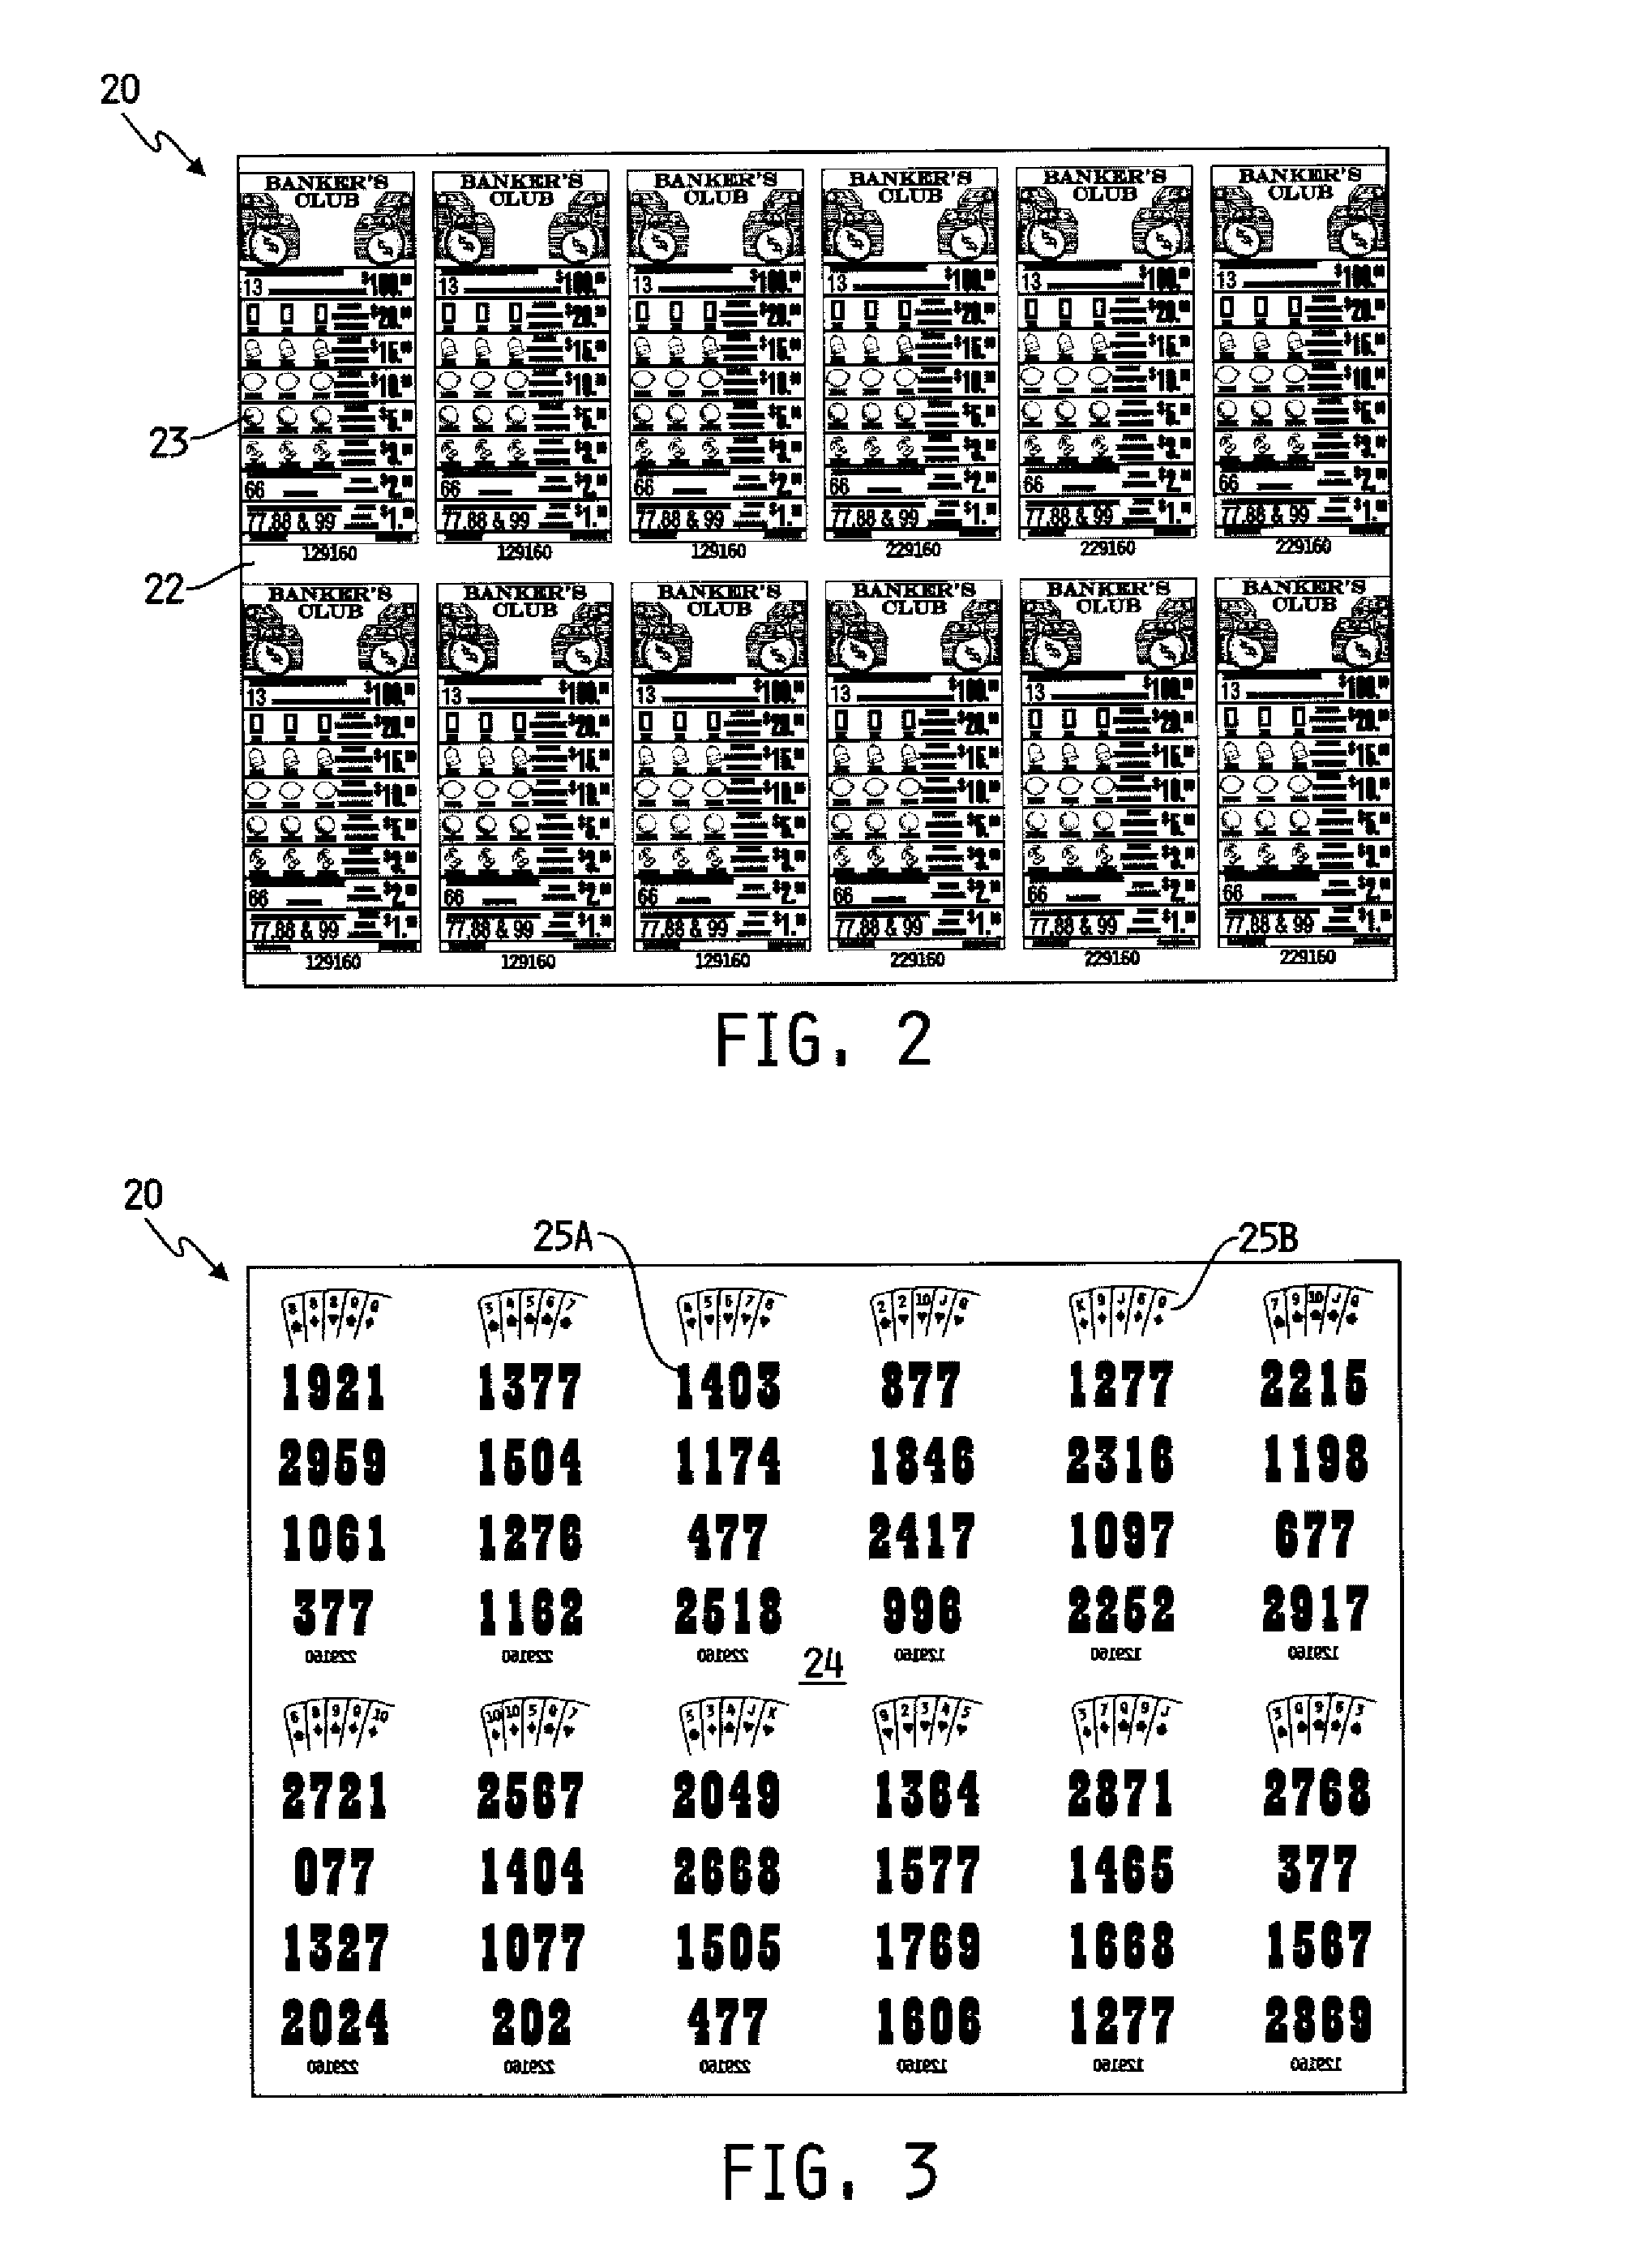 Spot-Foiling Gaming Tickets and Method for Providing Same